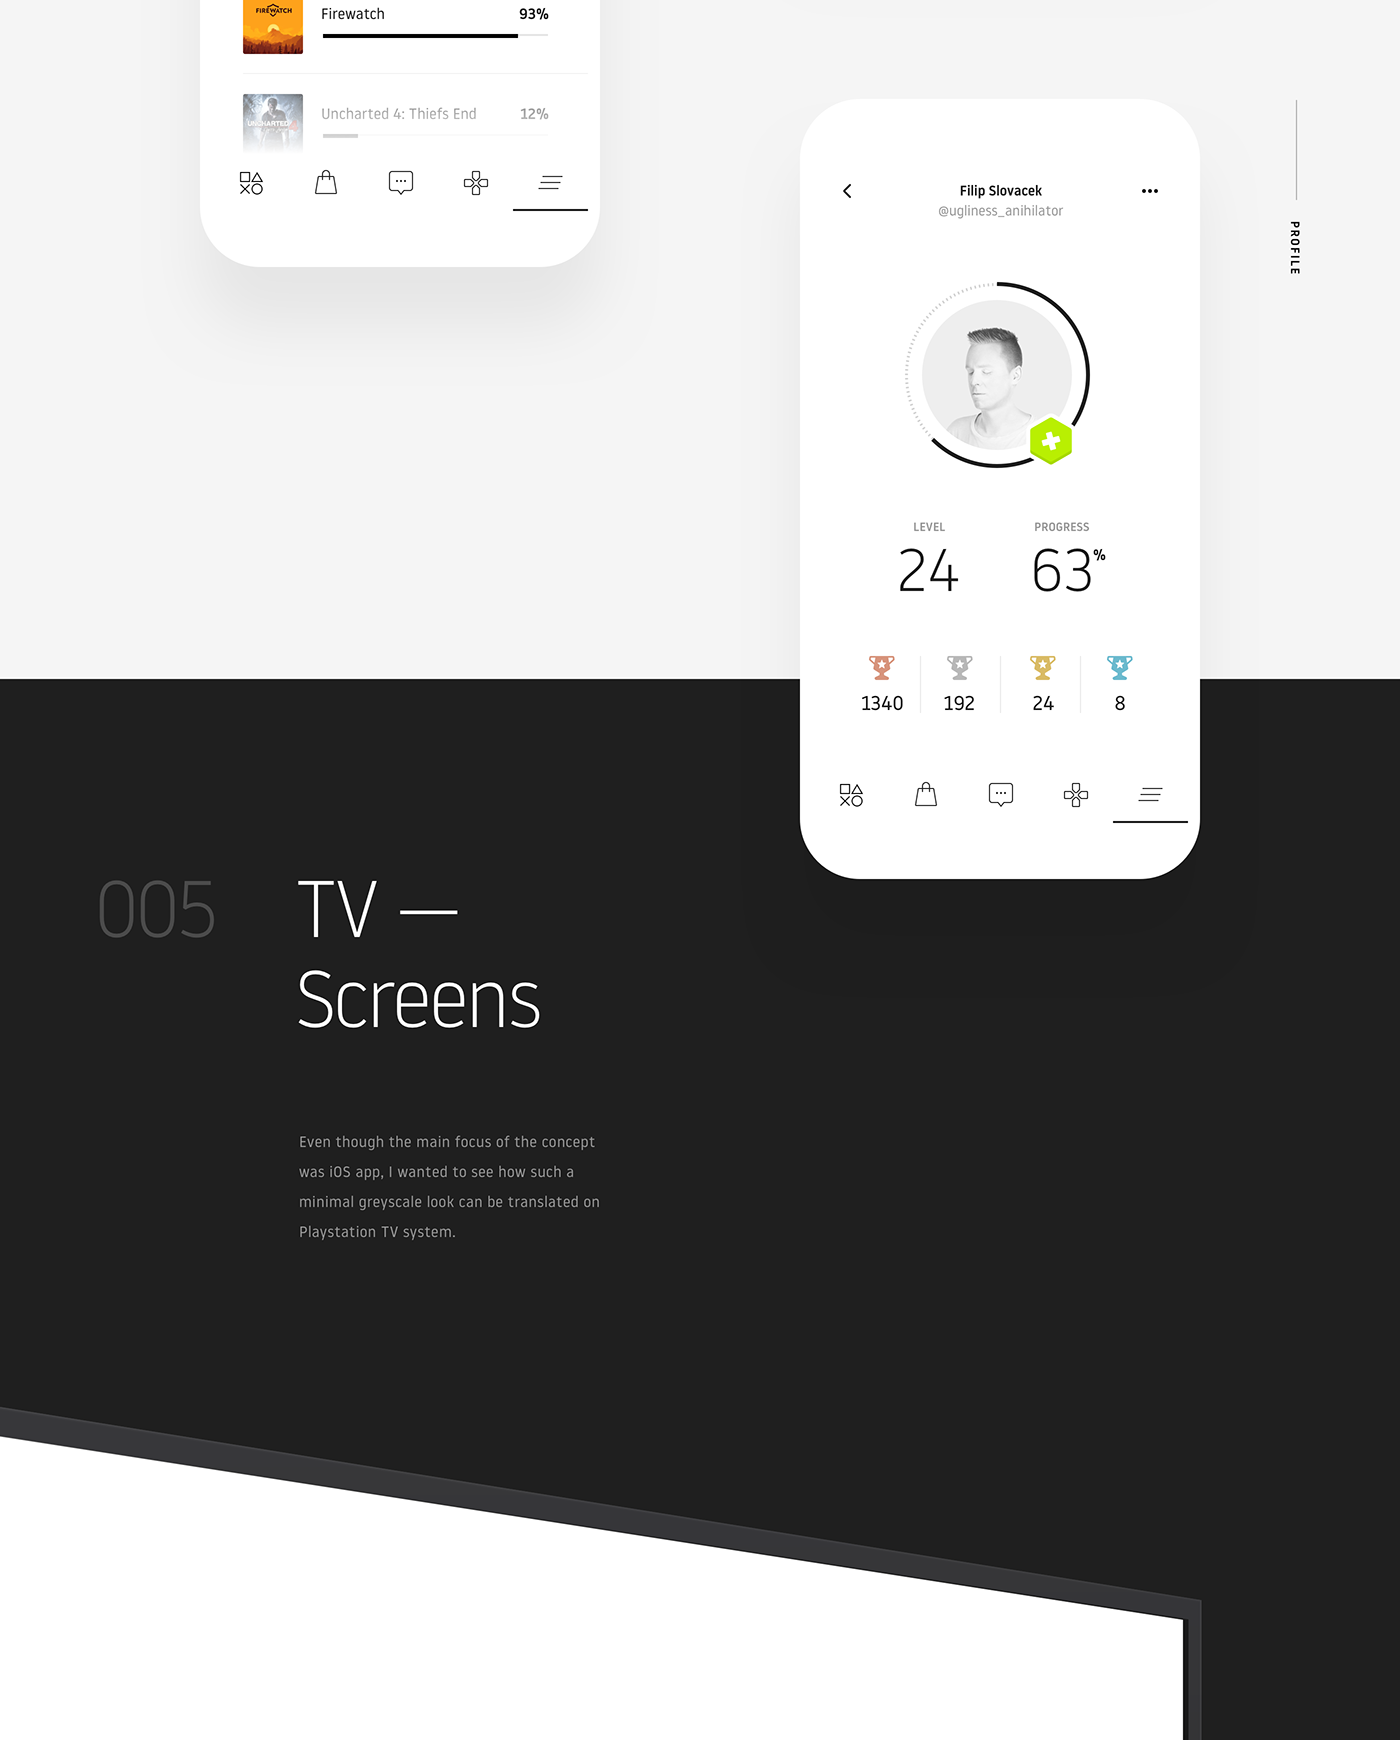 ios app playstation Sony Ps4 concept White minimal